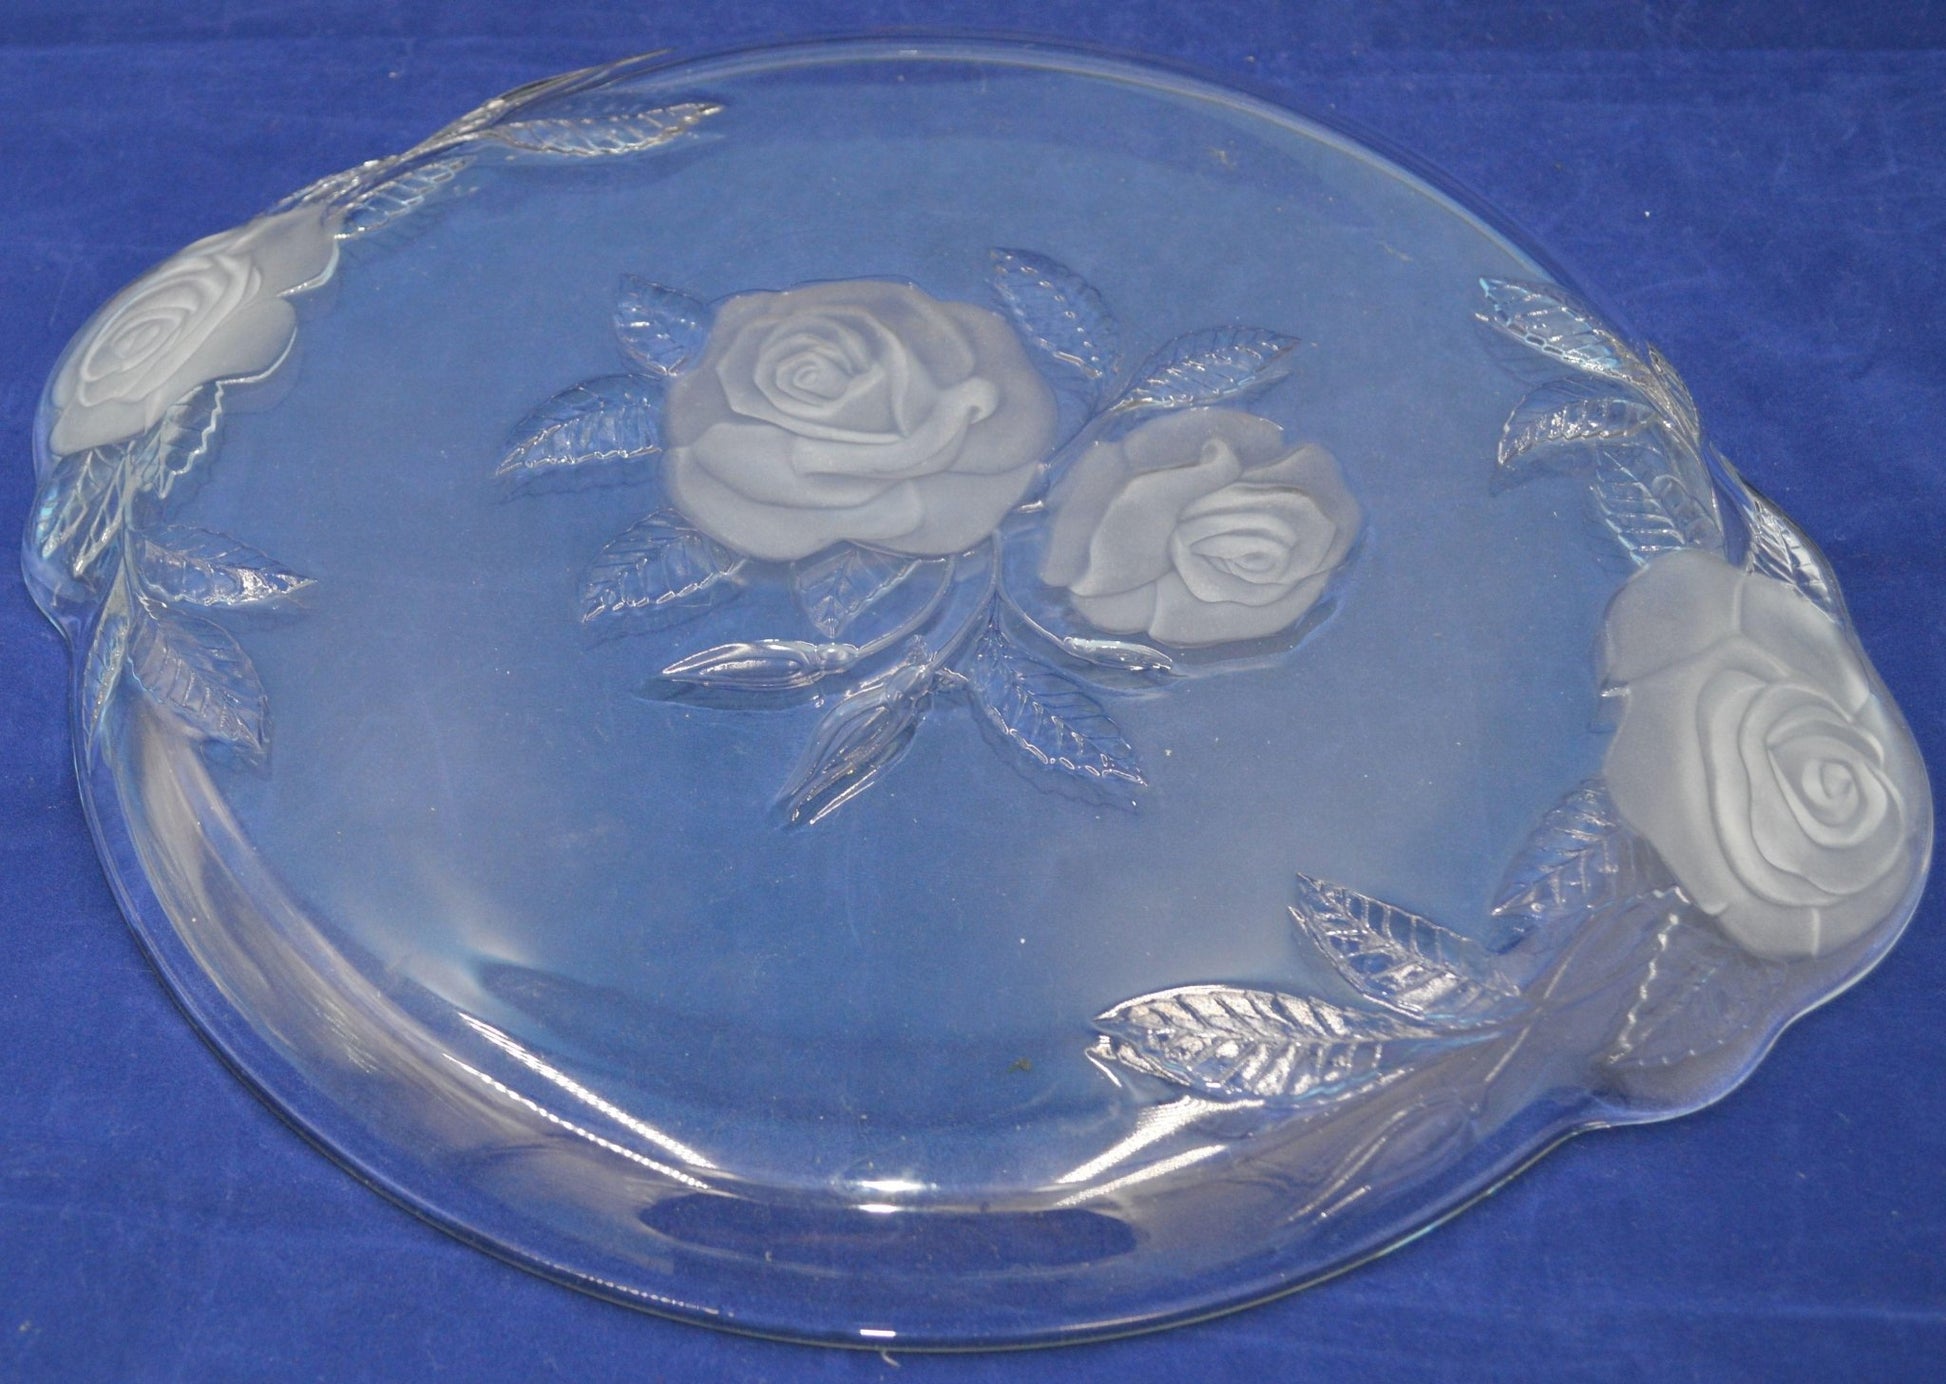 TABLEWARE TWO LUMINARC SERVING TRAYS WITH OPAQUE ROSE DESIGN - TMD167207